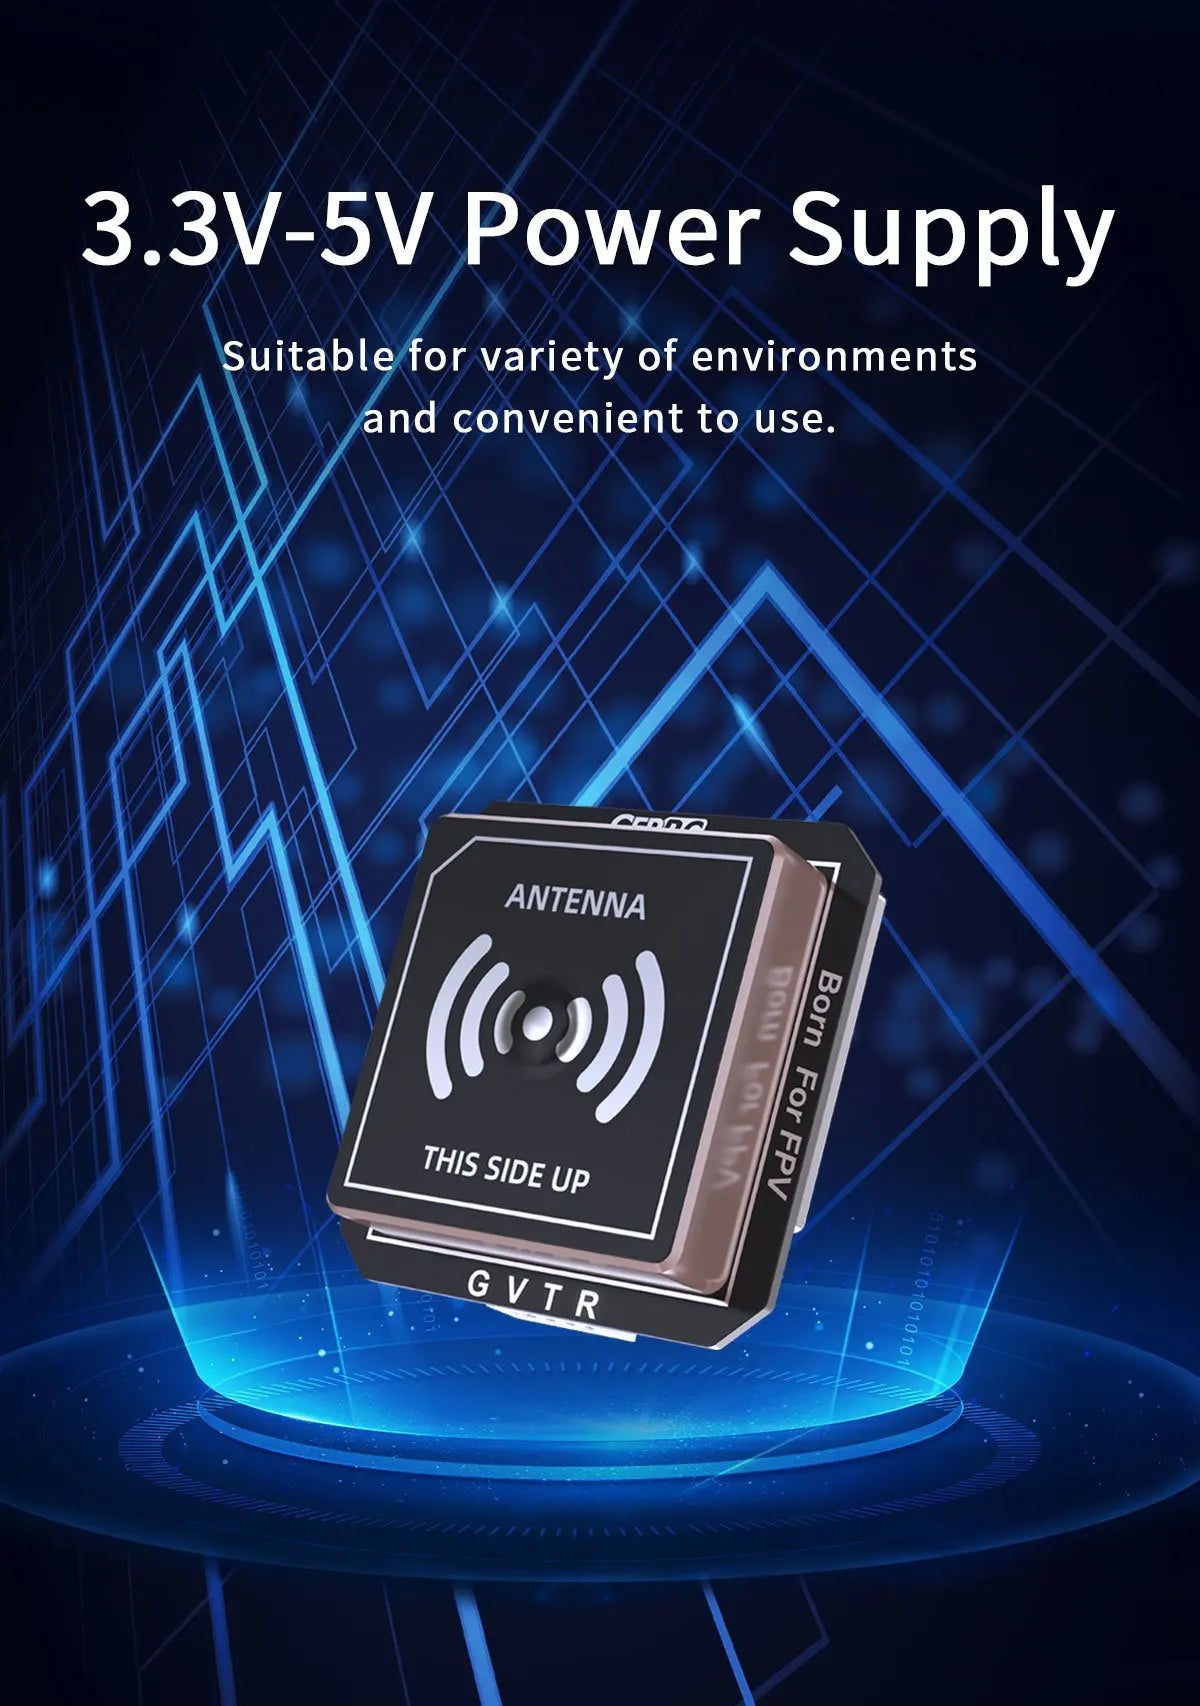 GEPRC GEP-M8U GPS, GEP-M8U GPS module features as small size, light weight, fast positioning and